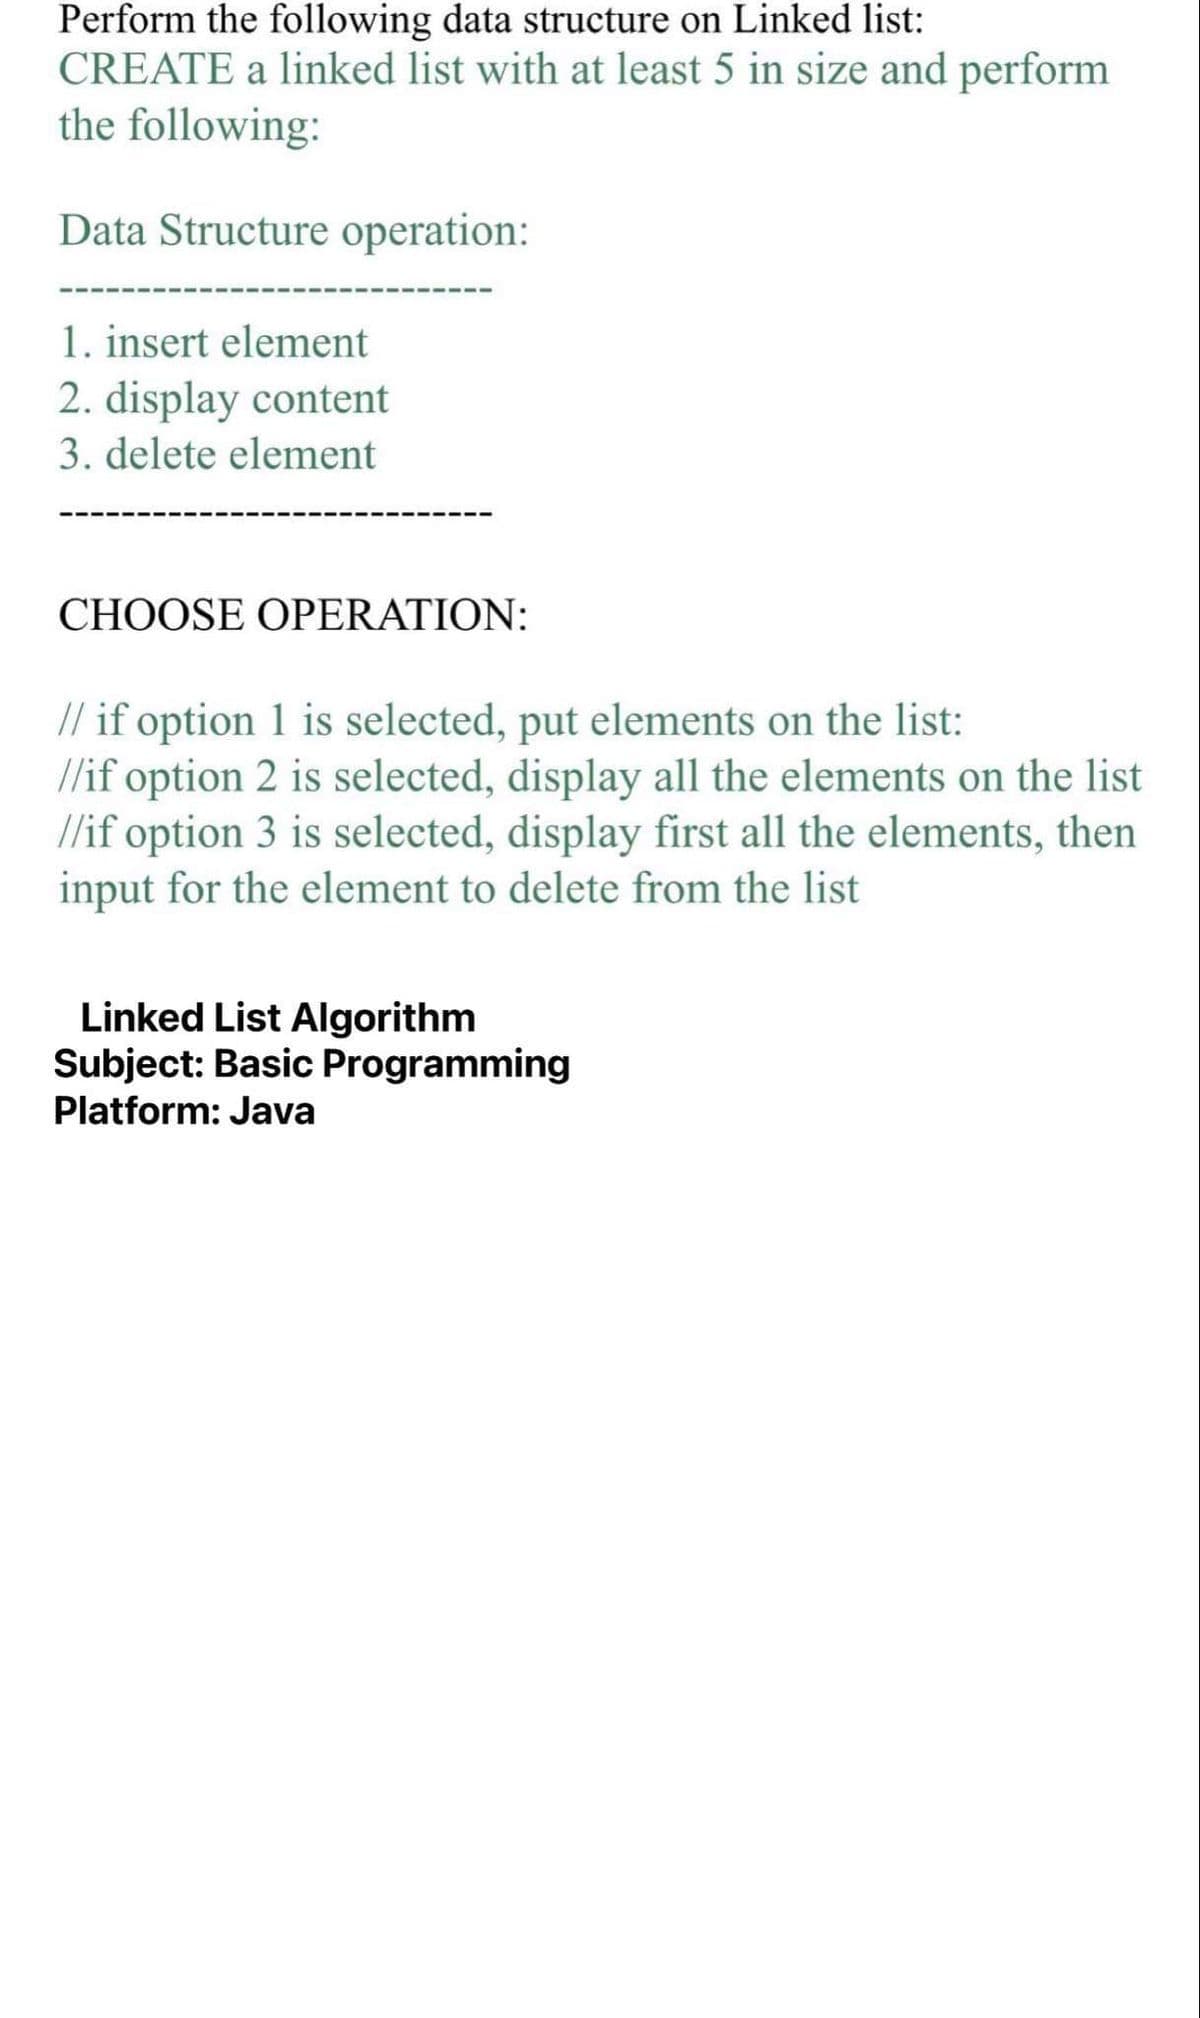 Perform the following data structure on Linked list:
CREATE a linked list with at least 5 in size and perform
the following:
Data Structure operation:
1. insert element
2. display content
3. delete element
CHOOSE OPERATION:
// if option 1 is selected, put elements on the list:
//if option 2 is selected, display all the elements on the list
//if option 3 is selected, display first all the elements, then
input for the element to delete from the list
Linked List Algorithm
Subject: Basic Programming
Platform: Java
